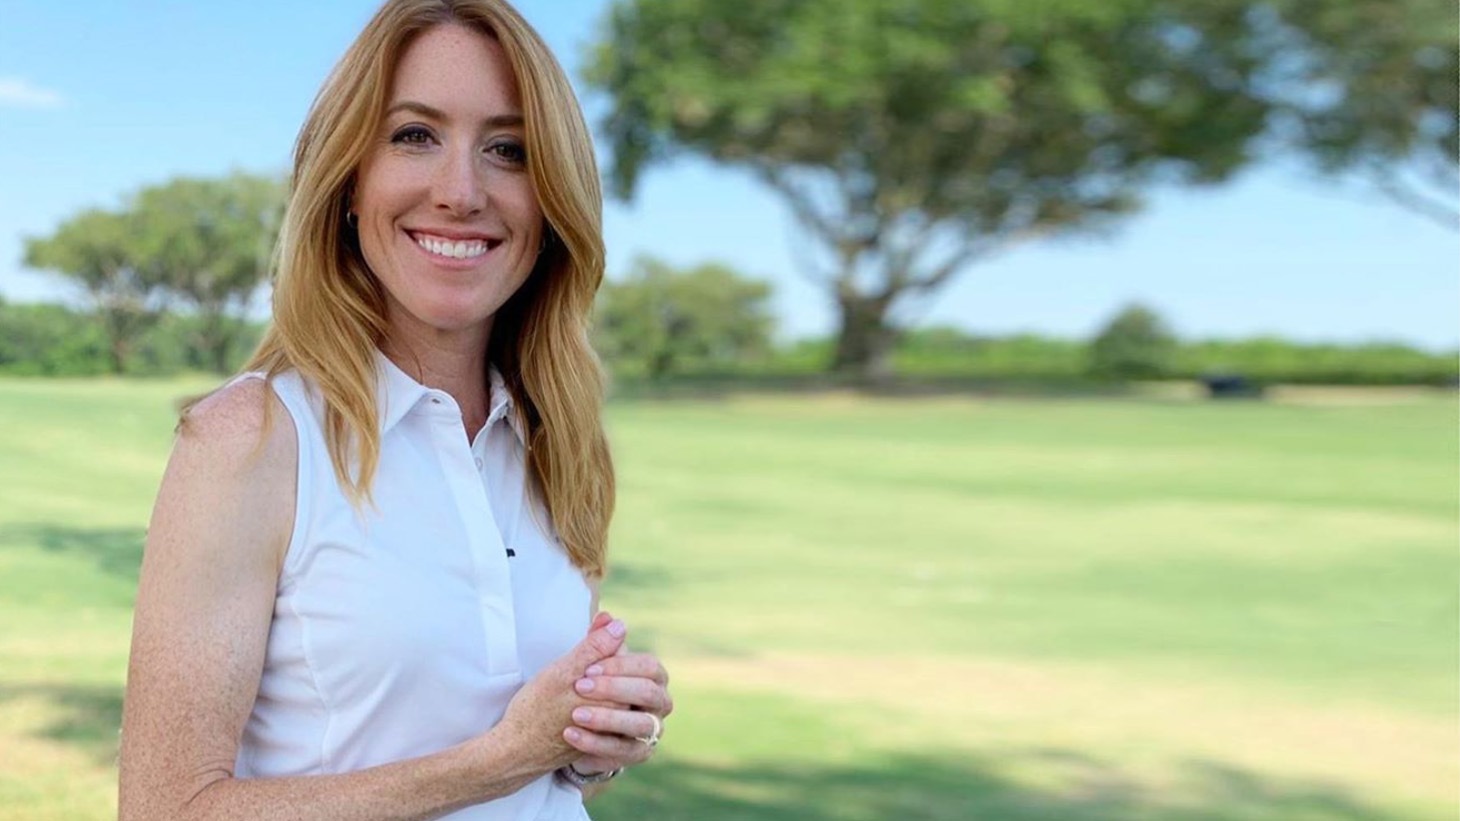 Titleist staff instructor Trillium Rose, Director of Instruction at Woodmont Country Club in Rockville, Maryland